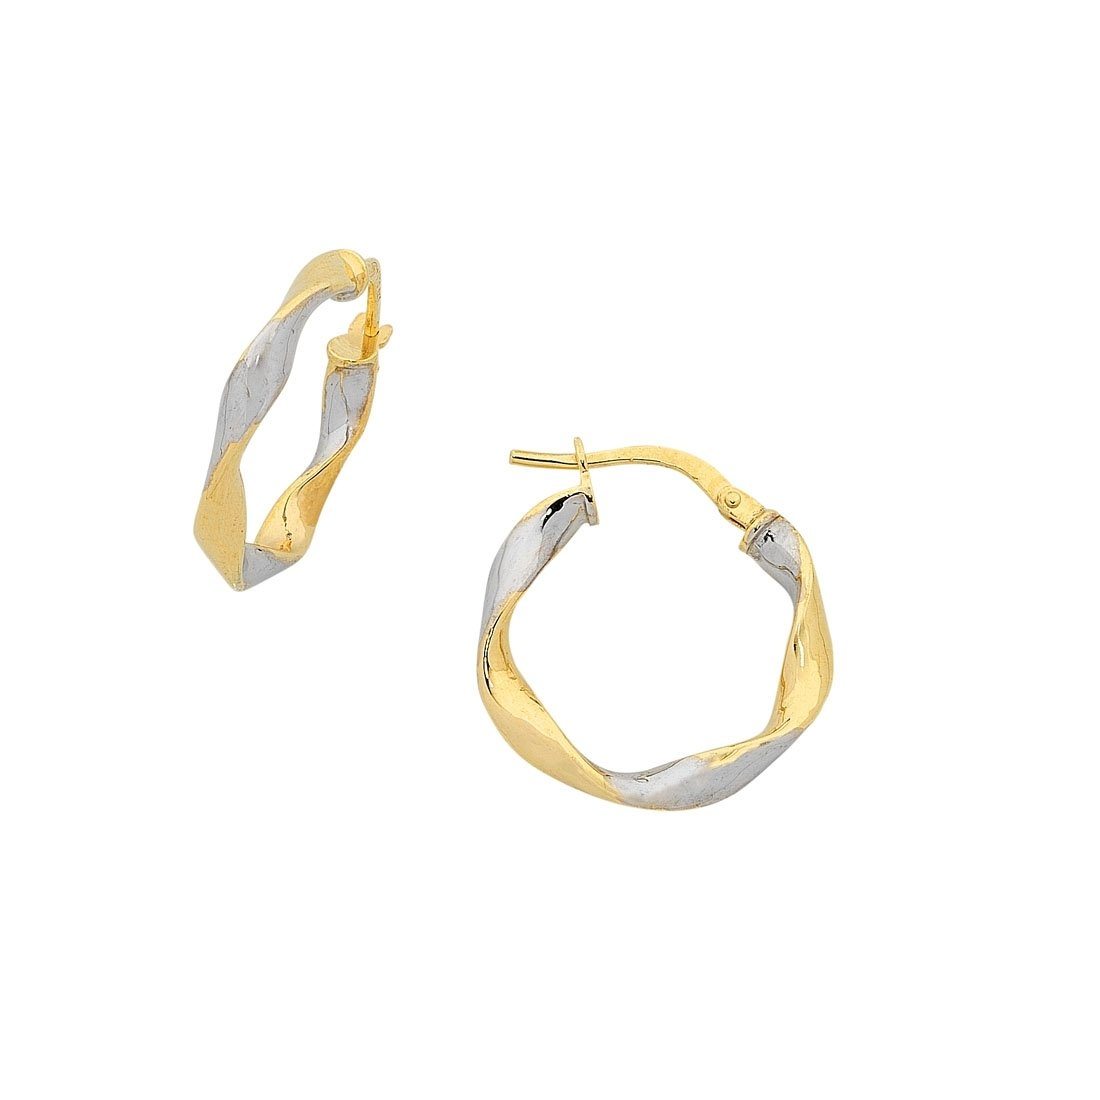 Bevilles 9ct Yellow Gold Silver Infused Two Tone Earrings 20mm Twist